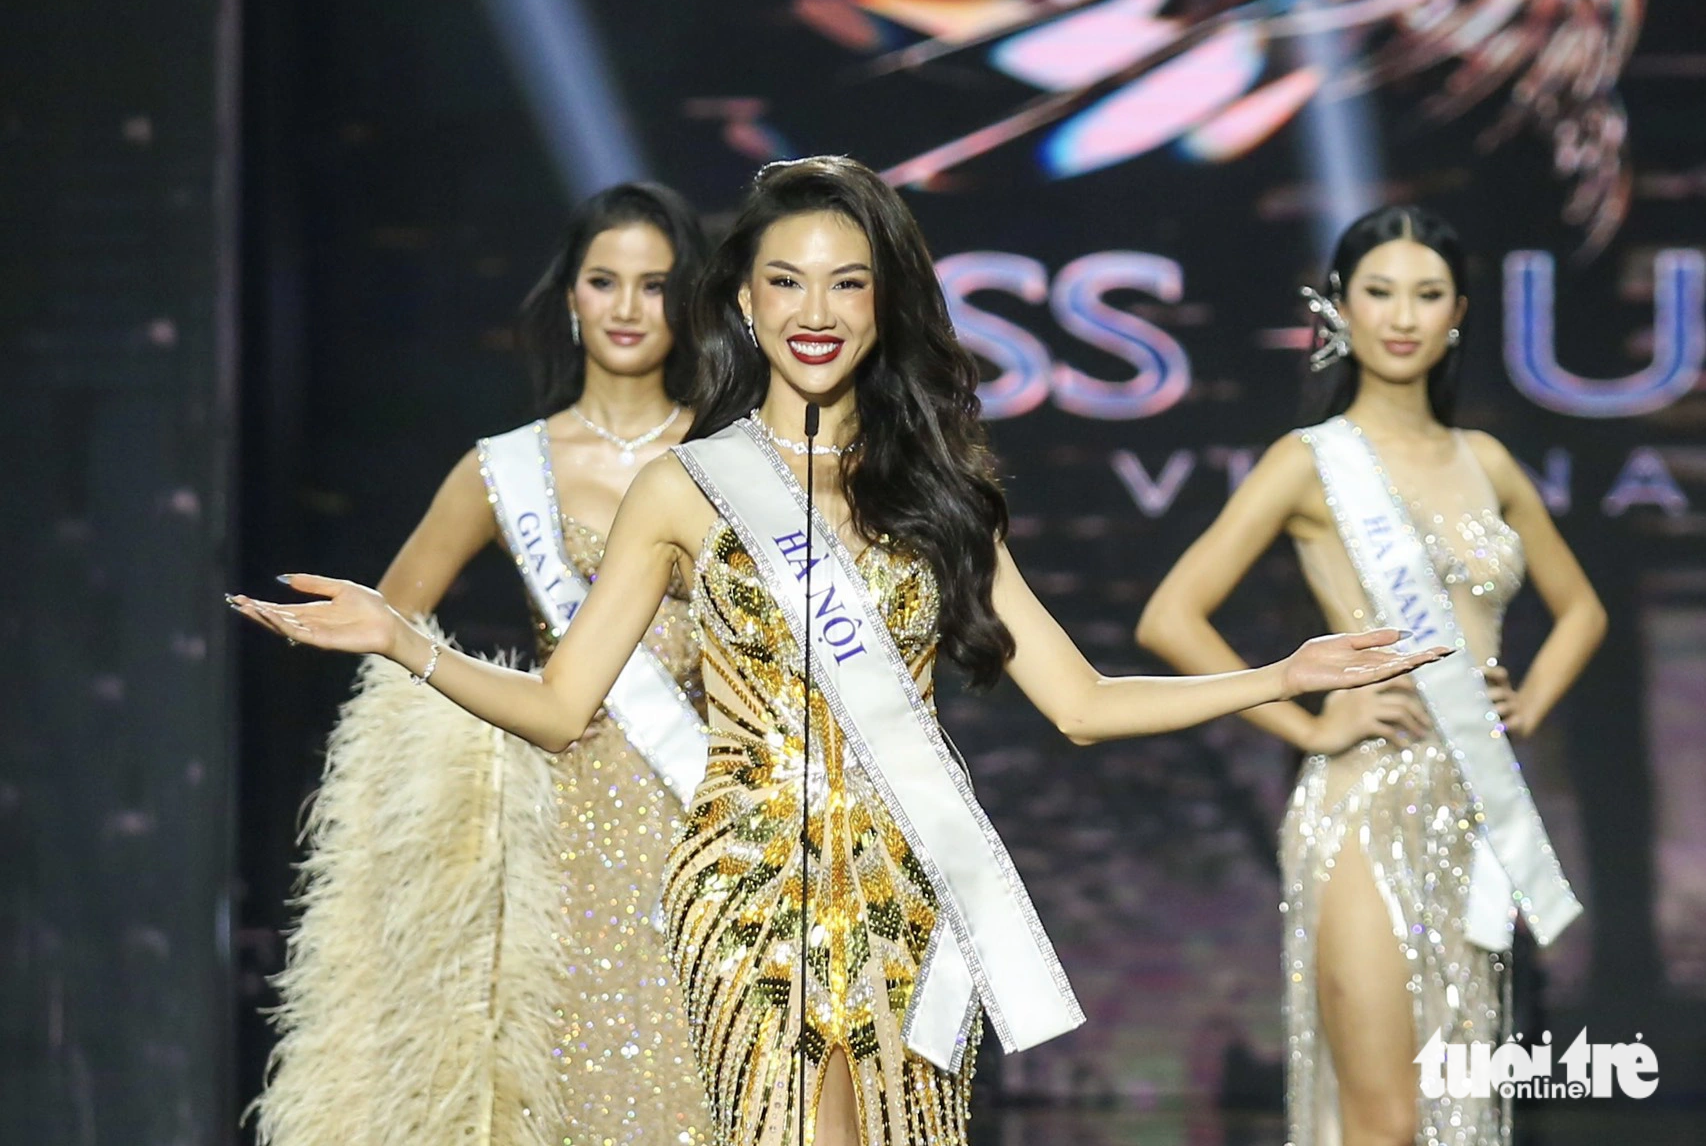 Bui Quynh Hoa during the Q&A portion at the Miss Universe Vietnam 2023 finale in Ho Chi Minh City, September 29, 2023. Photo: Phuong Quyen / Tuoi Tre